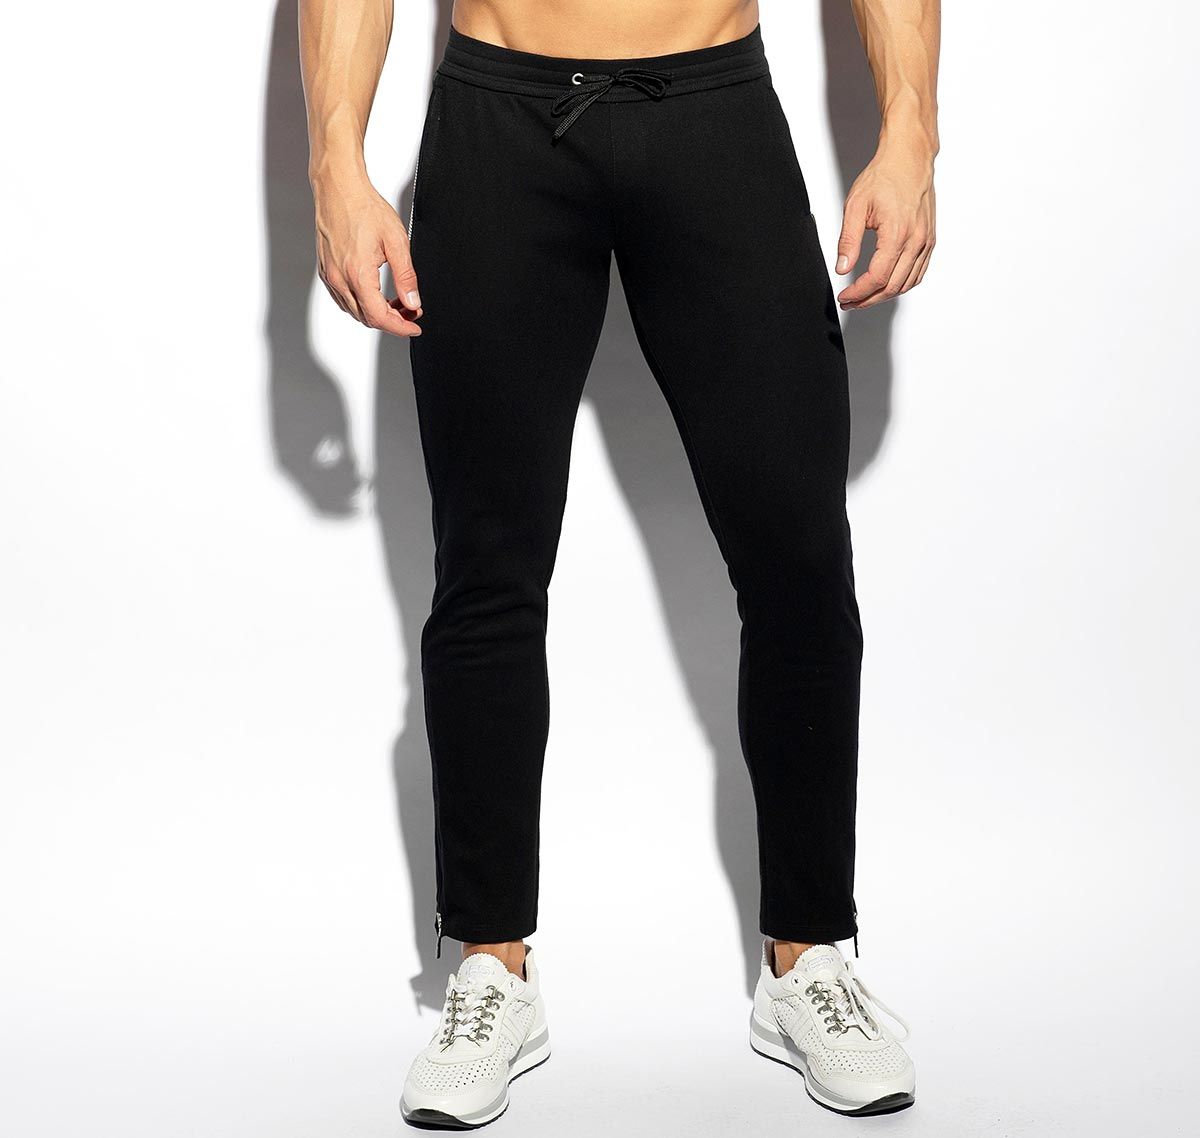 ES Collection Training pants FIRST CLASS ATHLETIC PANTS SP294, black